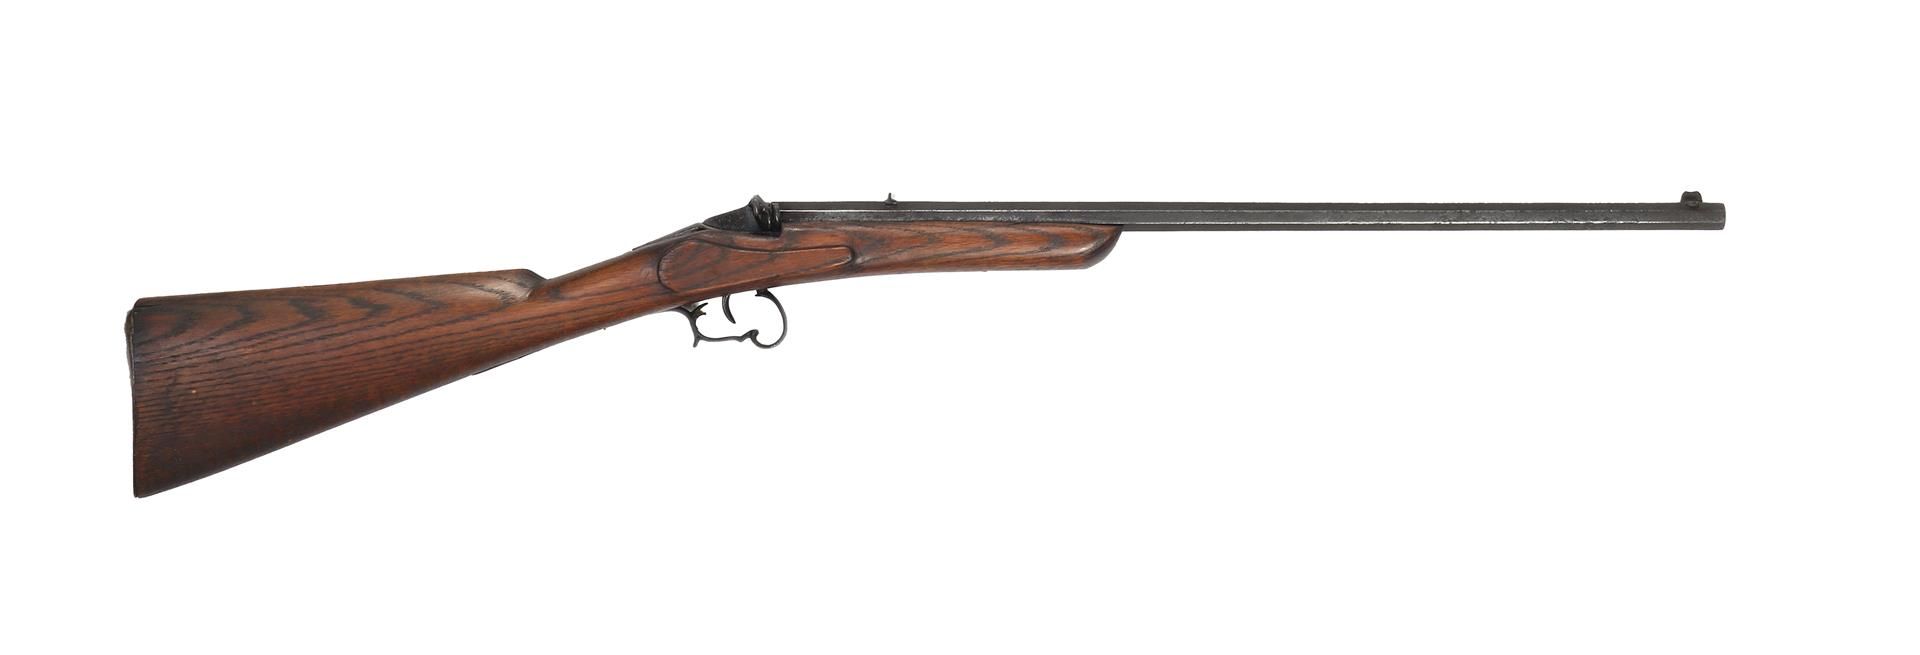 Rifle with octagonal barrel and pinfire